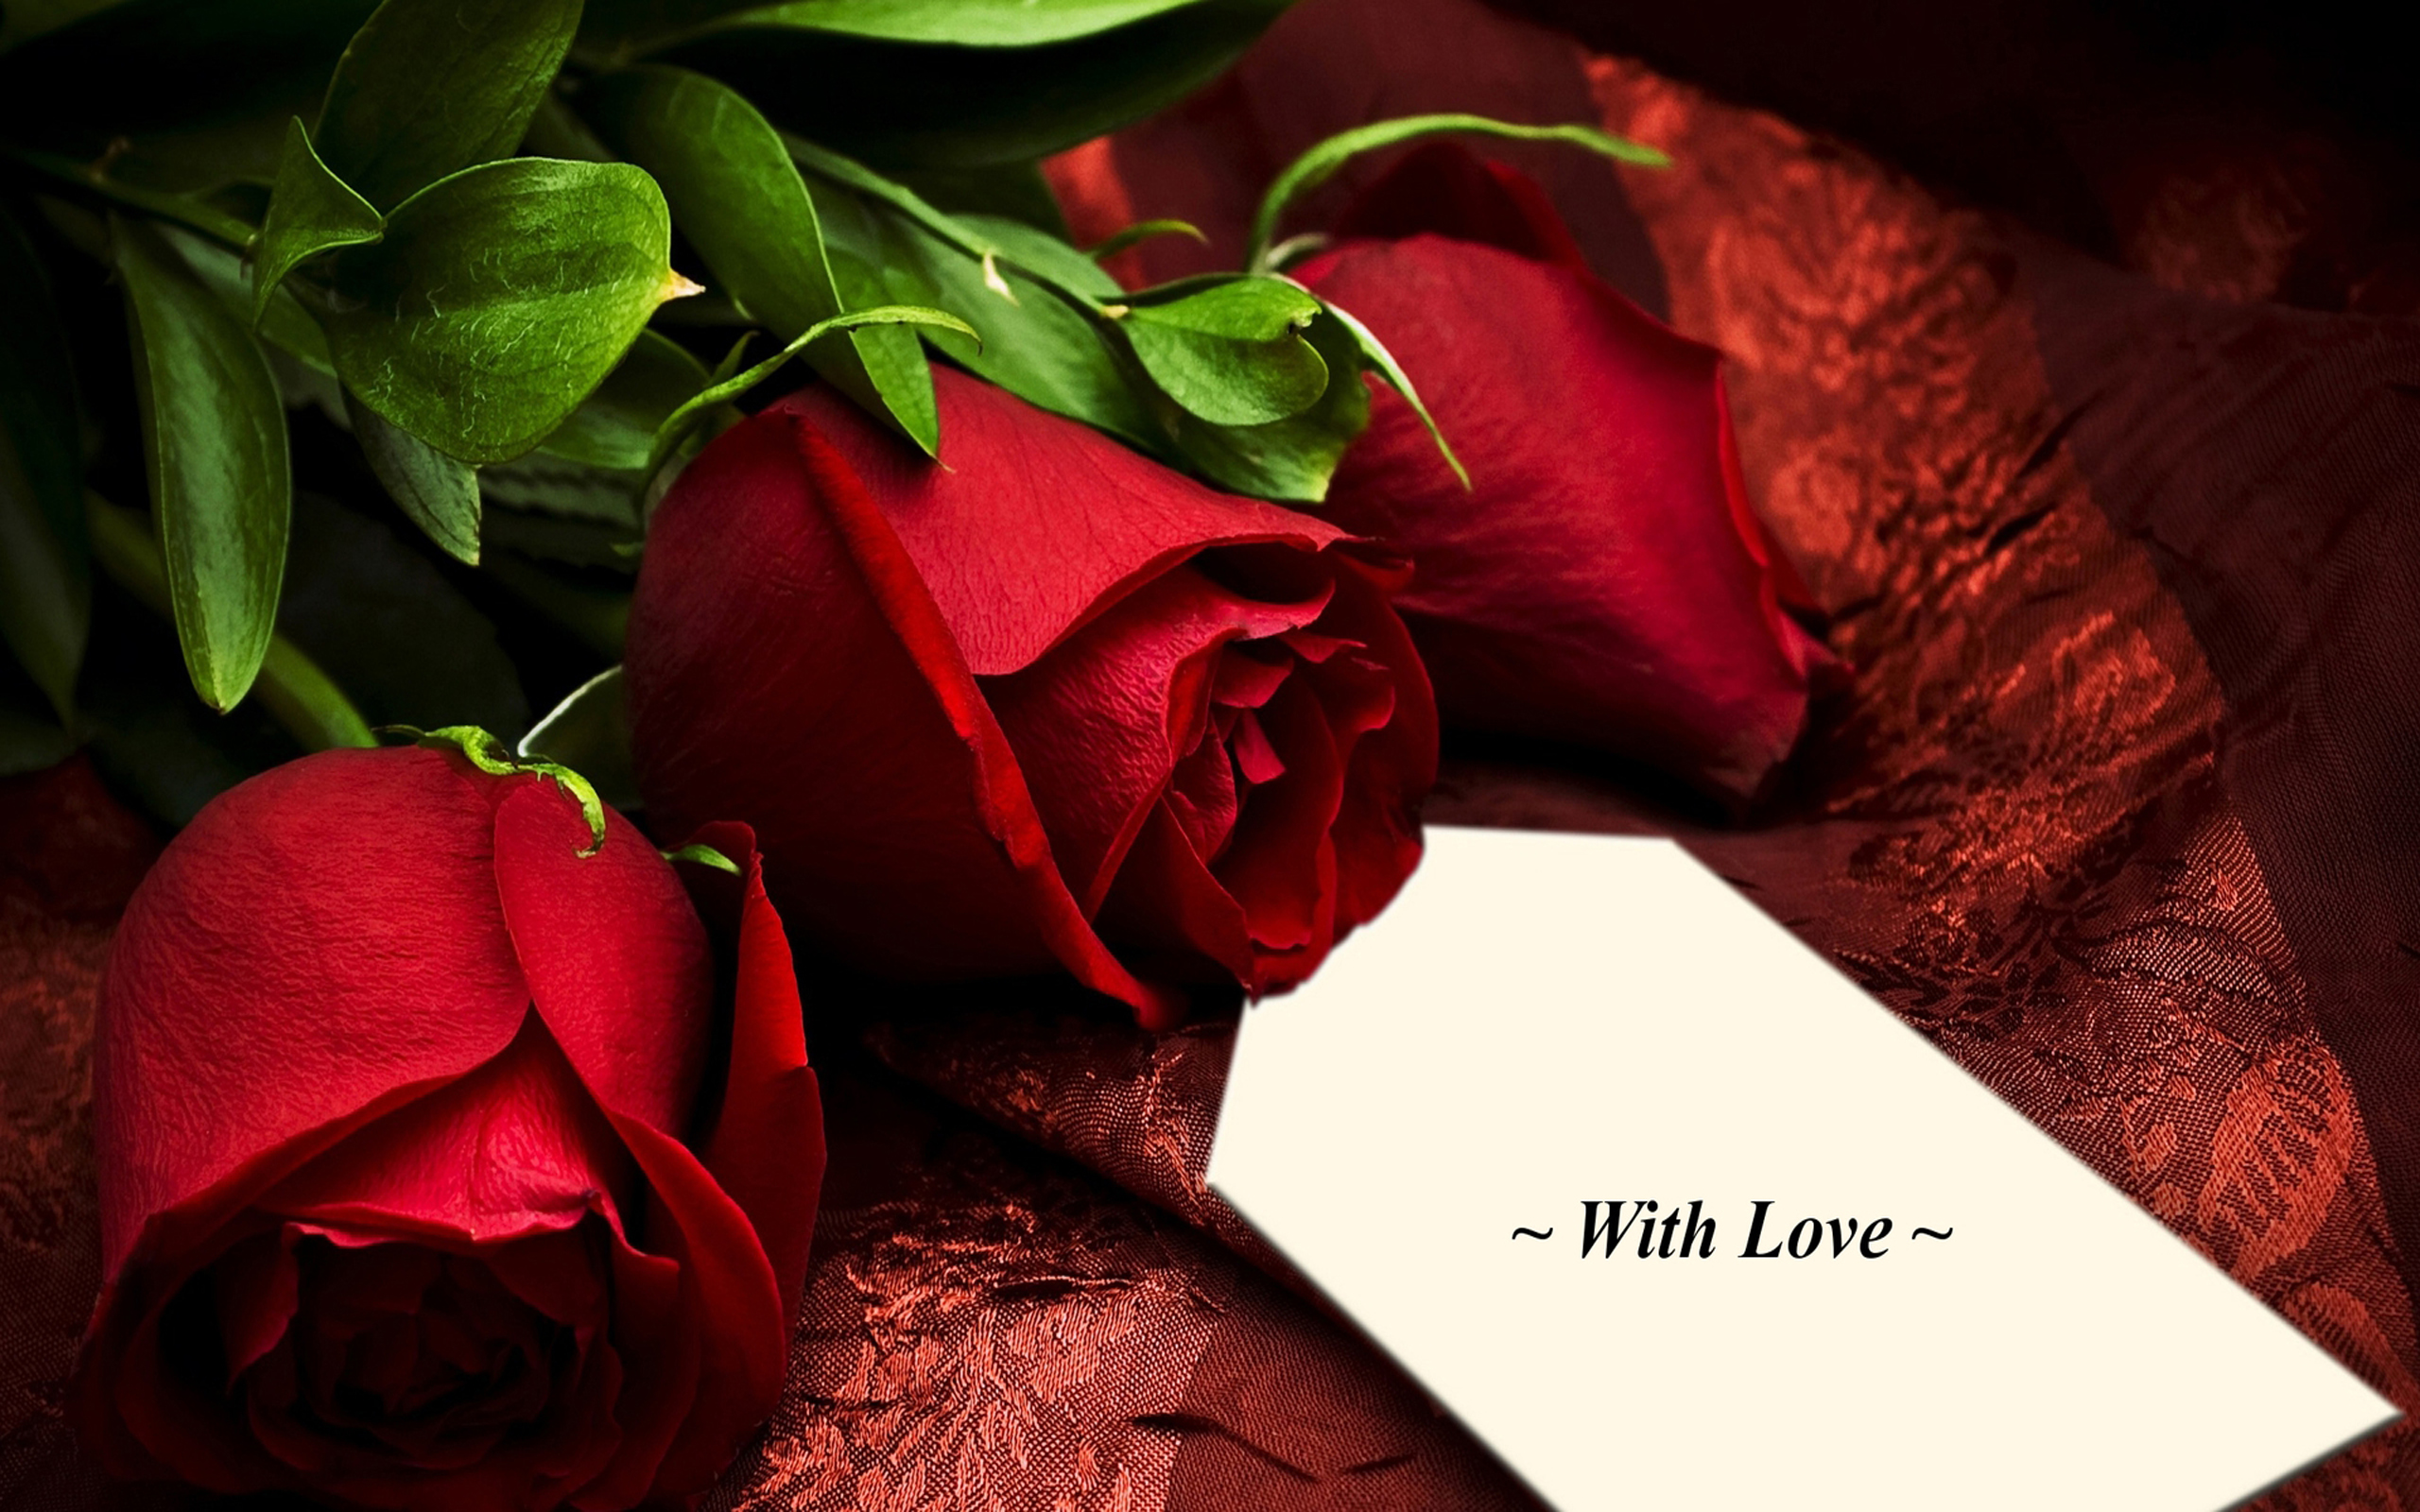 Romance Pretty Red Roses Romantic Rose With Love 1937404 : Wallpapers13.com2560 x 1600